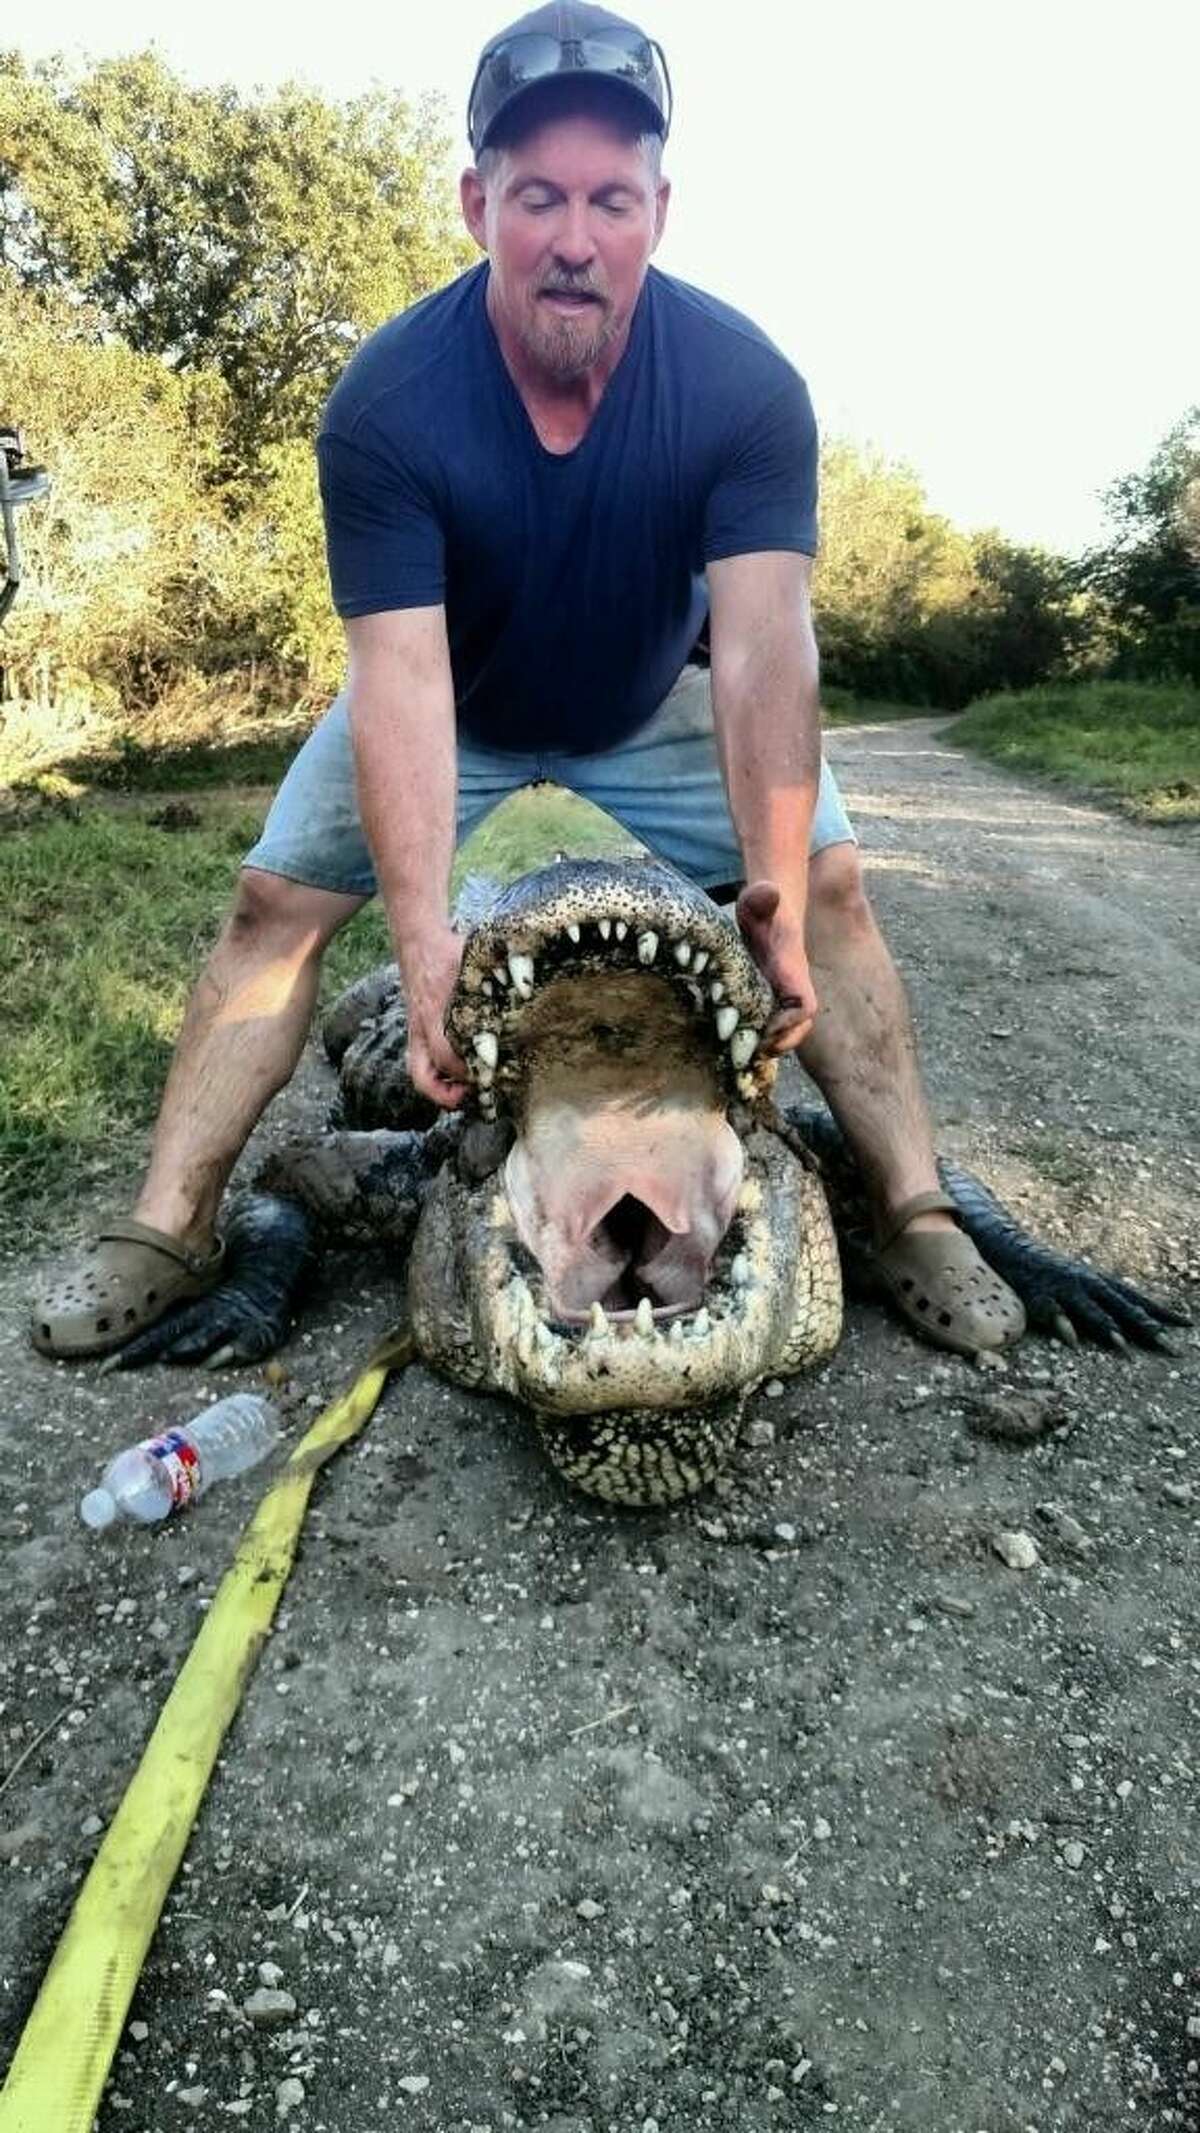 Lee Sanford holds open the mouth of an alligator he caught Monday afternoon in Day Lake south of Dayton. The gator measured 13 feet, 8.5 inches and weighed between 800 and 1,000 pounds.